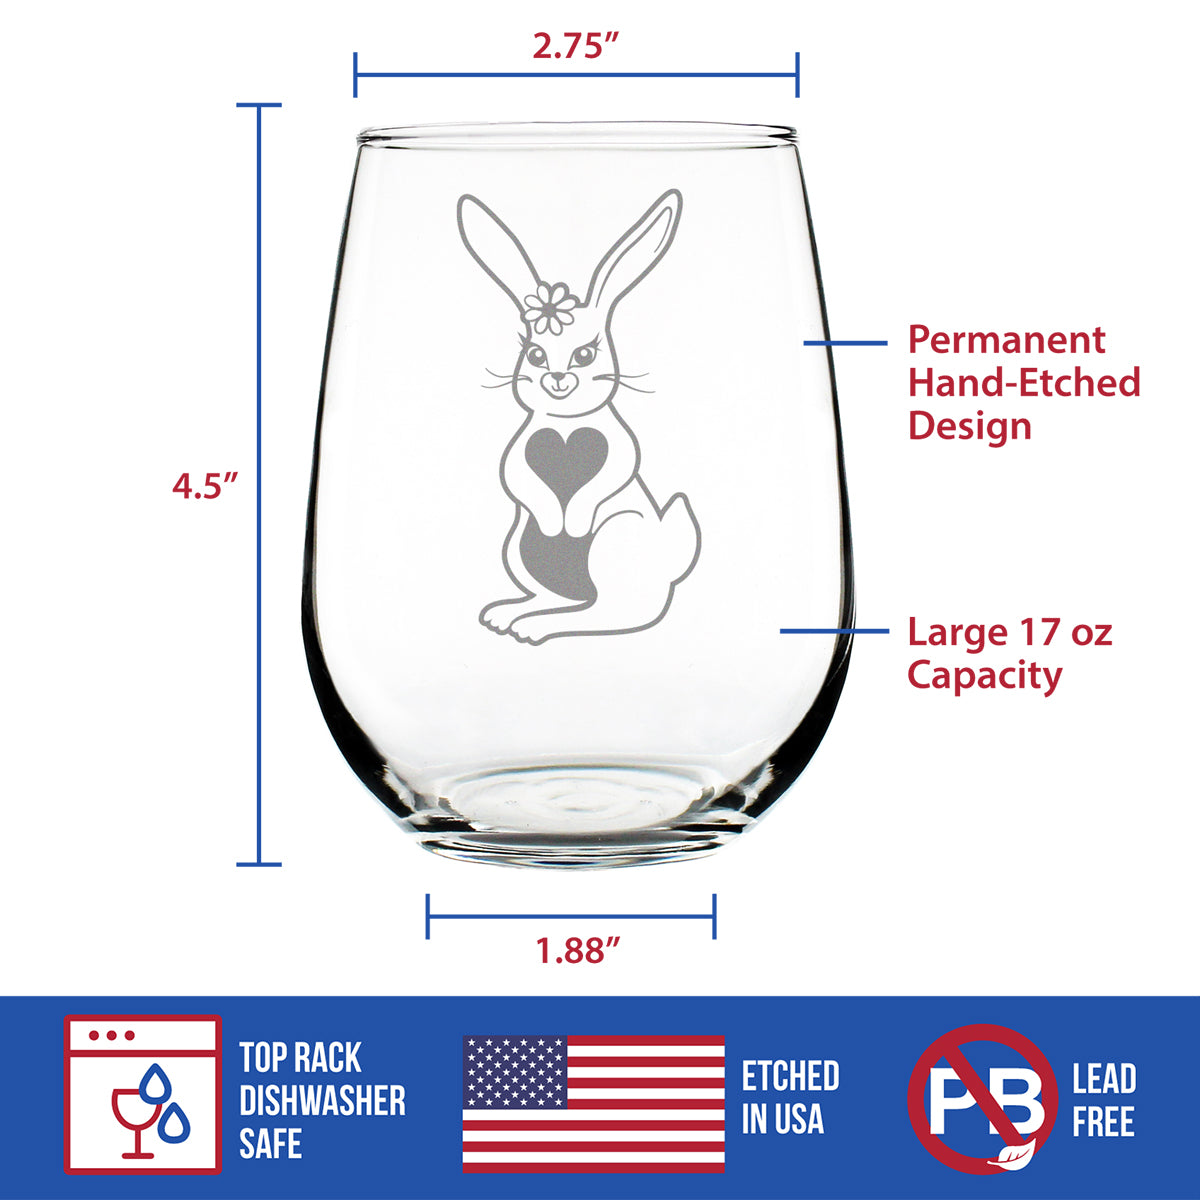 Cute Bunny Rabbit - Stemless Wine Glass - Hand Engraved Gifts for Men &amp; Women That Love Bunnies